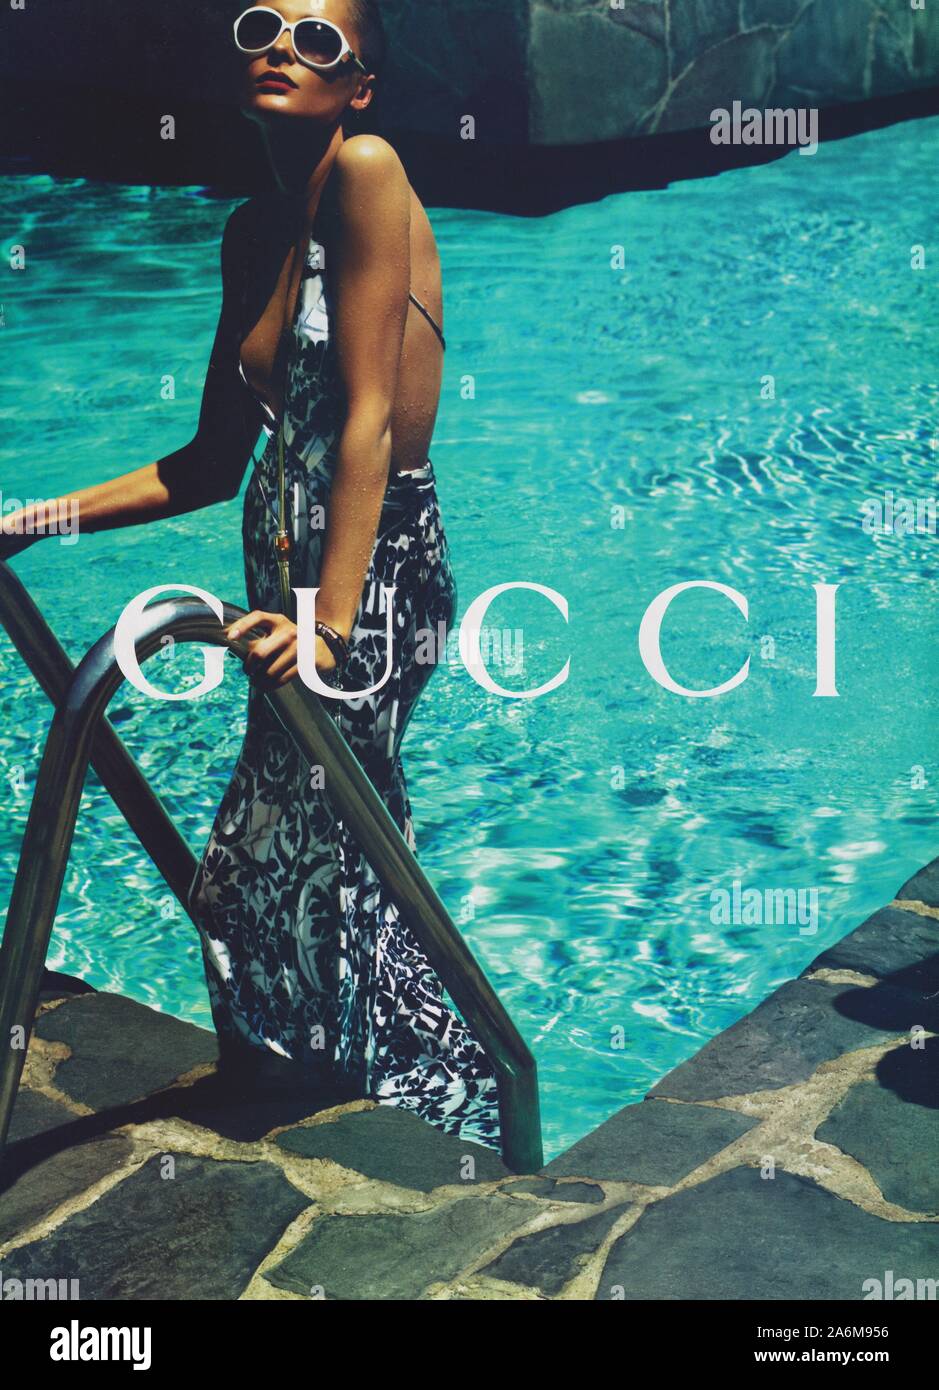 poster advertising GUCCI fashion house in paper magazine from 2010 year,  advertisement, creative GUCCI 2010s advert Stock Photo - Alamy